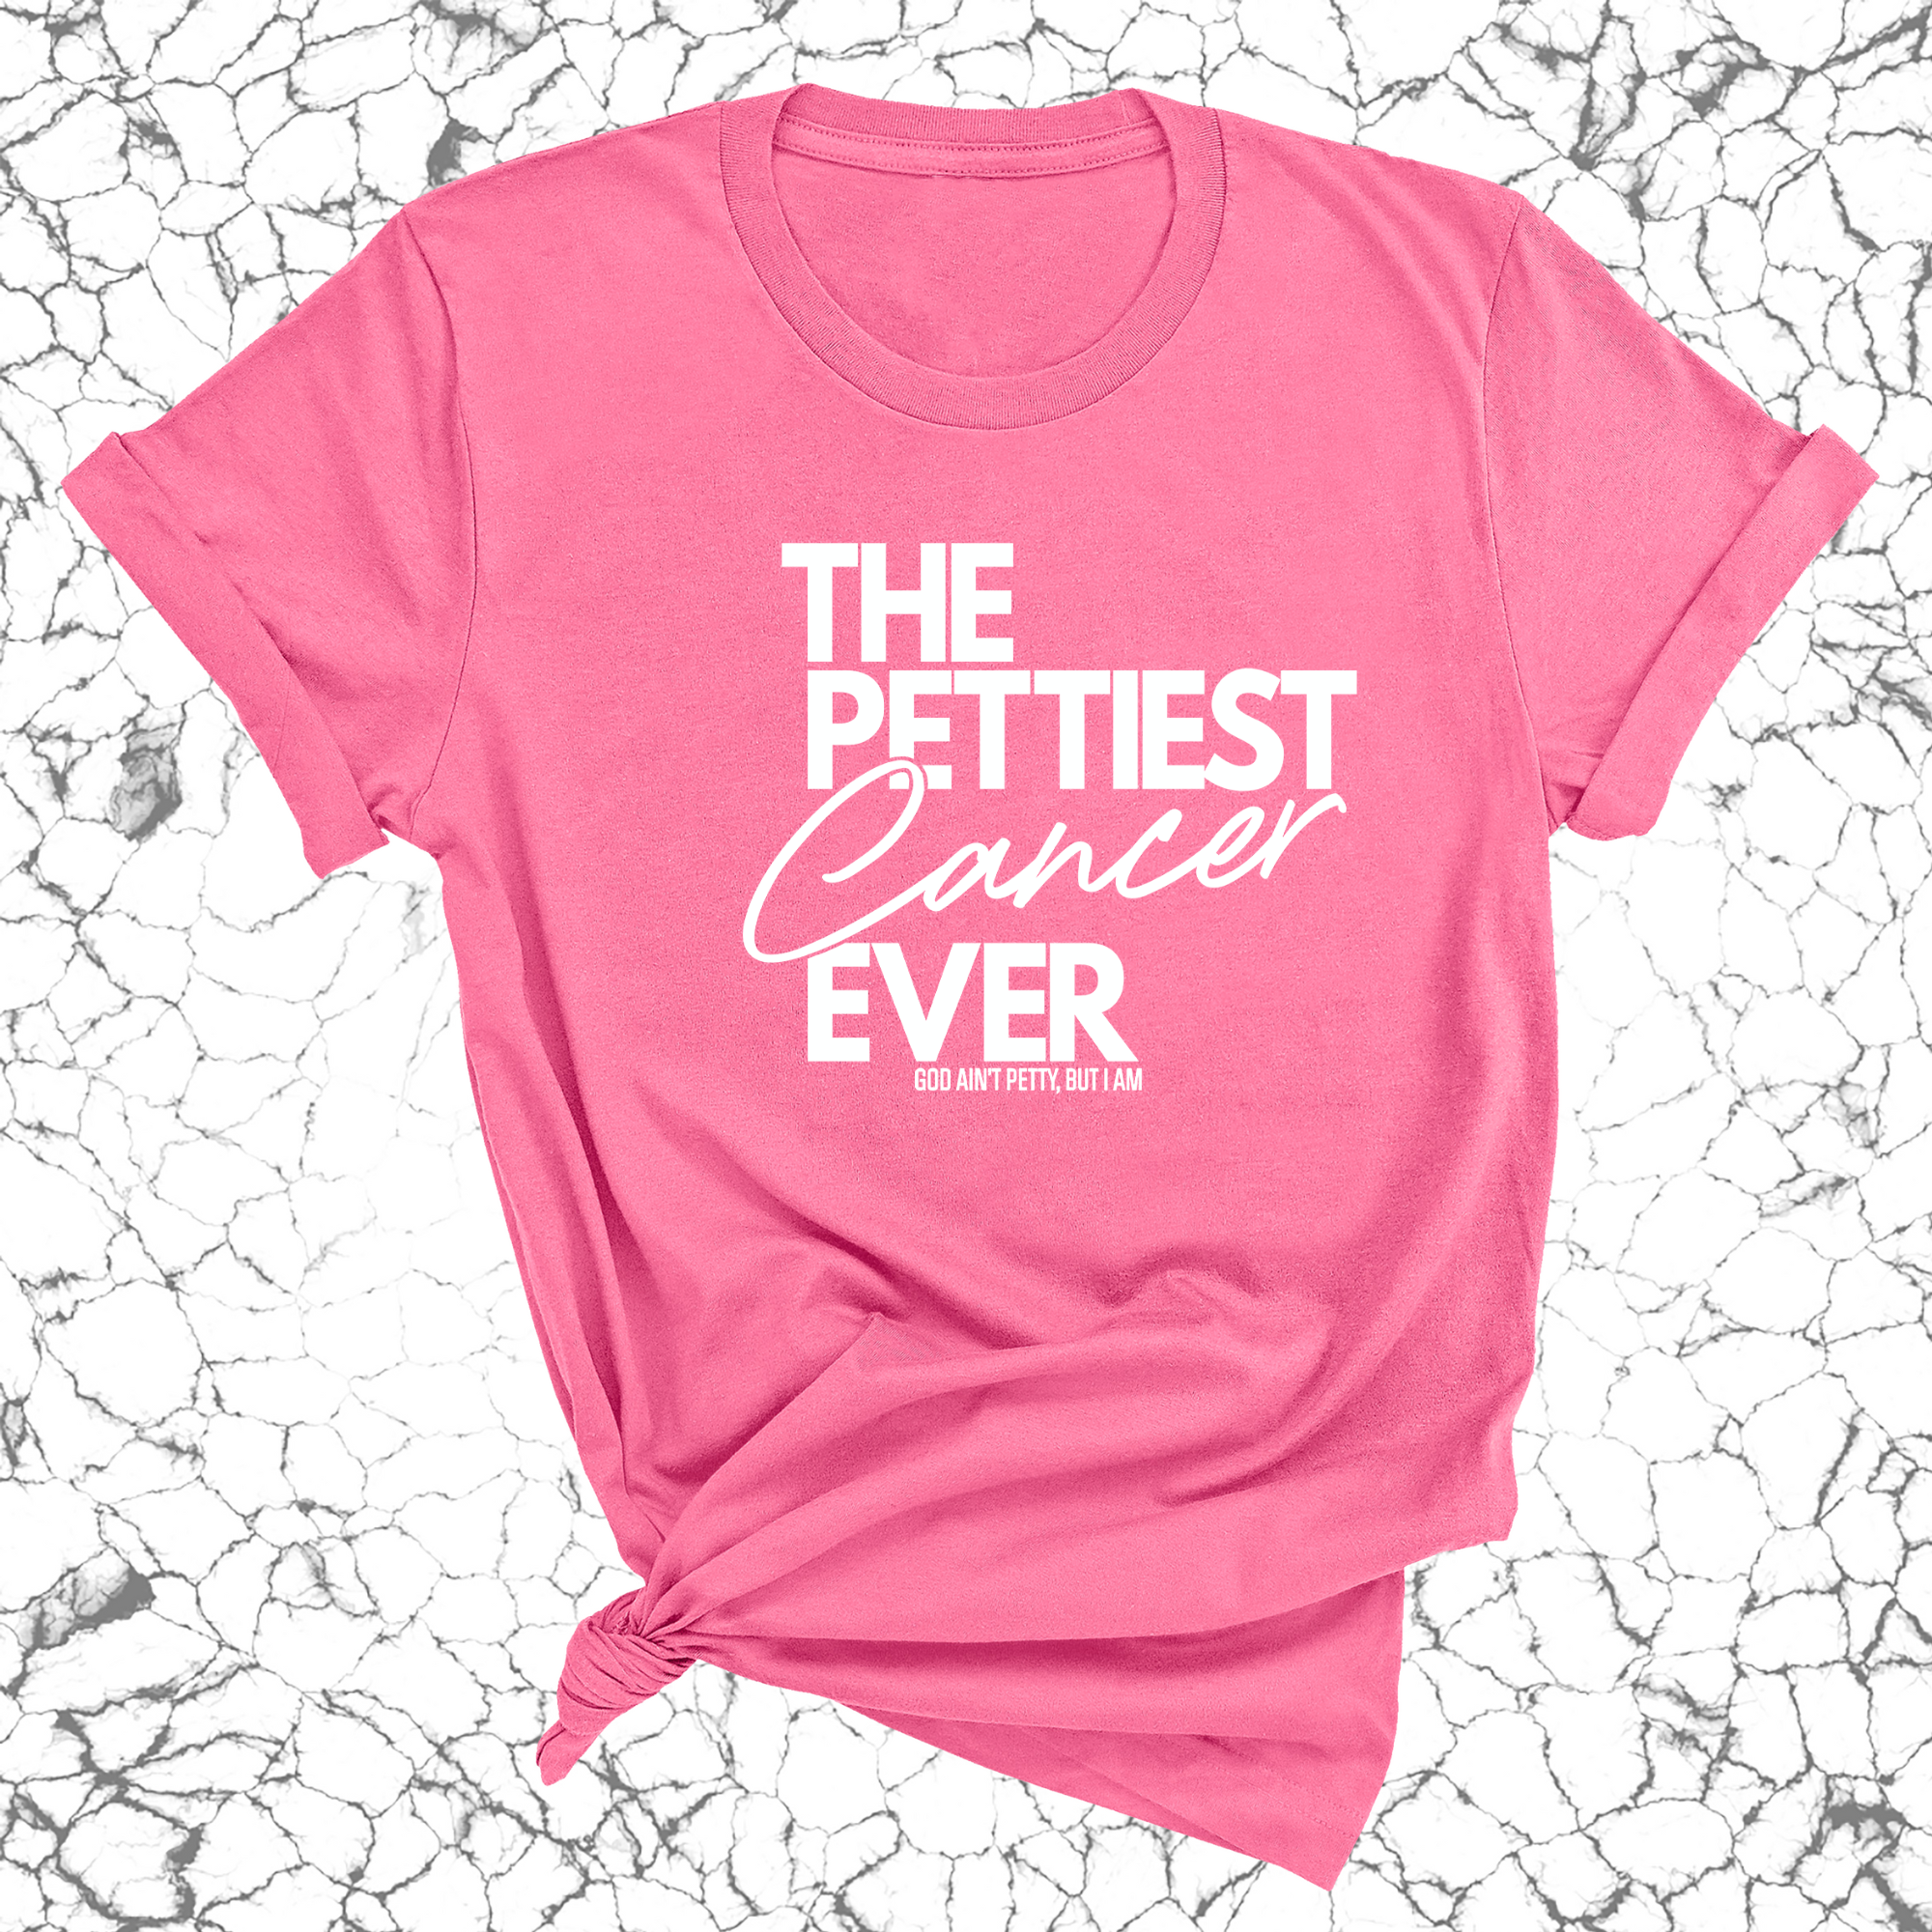 The Pettiest Cancer Ever Unisex Tee-T-Shirt-The Original God Ain't Petty But I Am